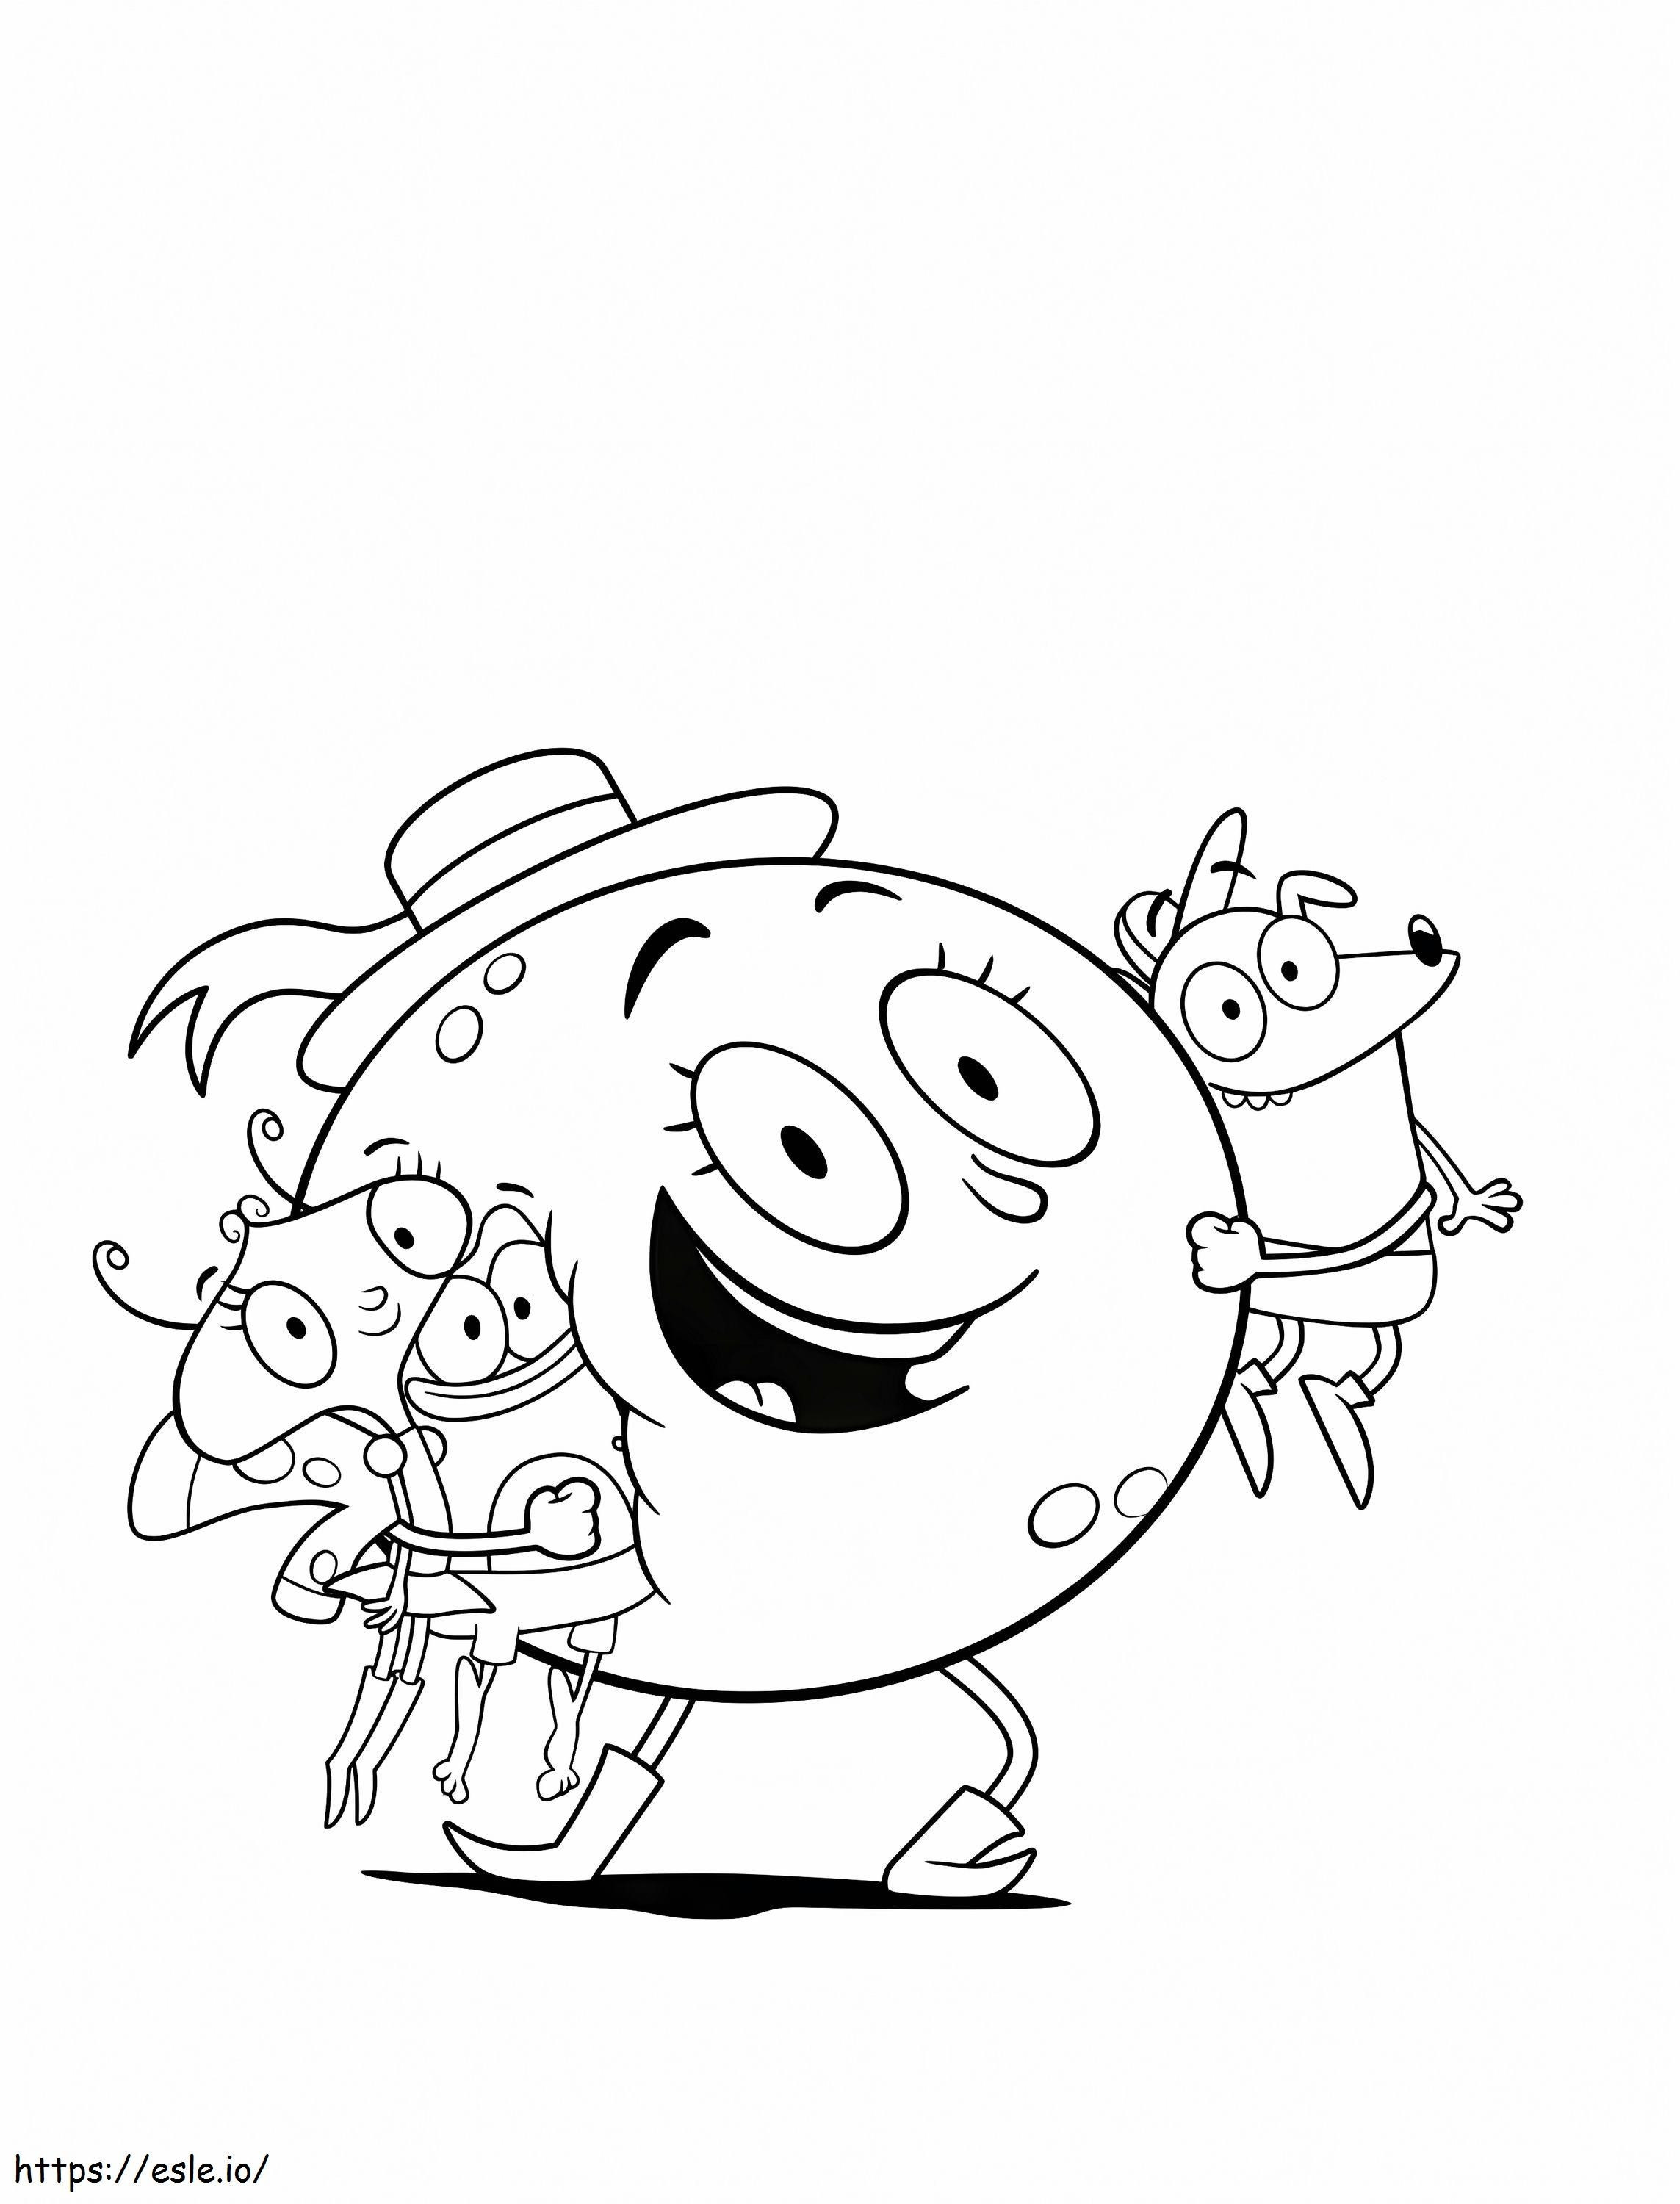 Moon And Friends coloring page